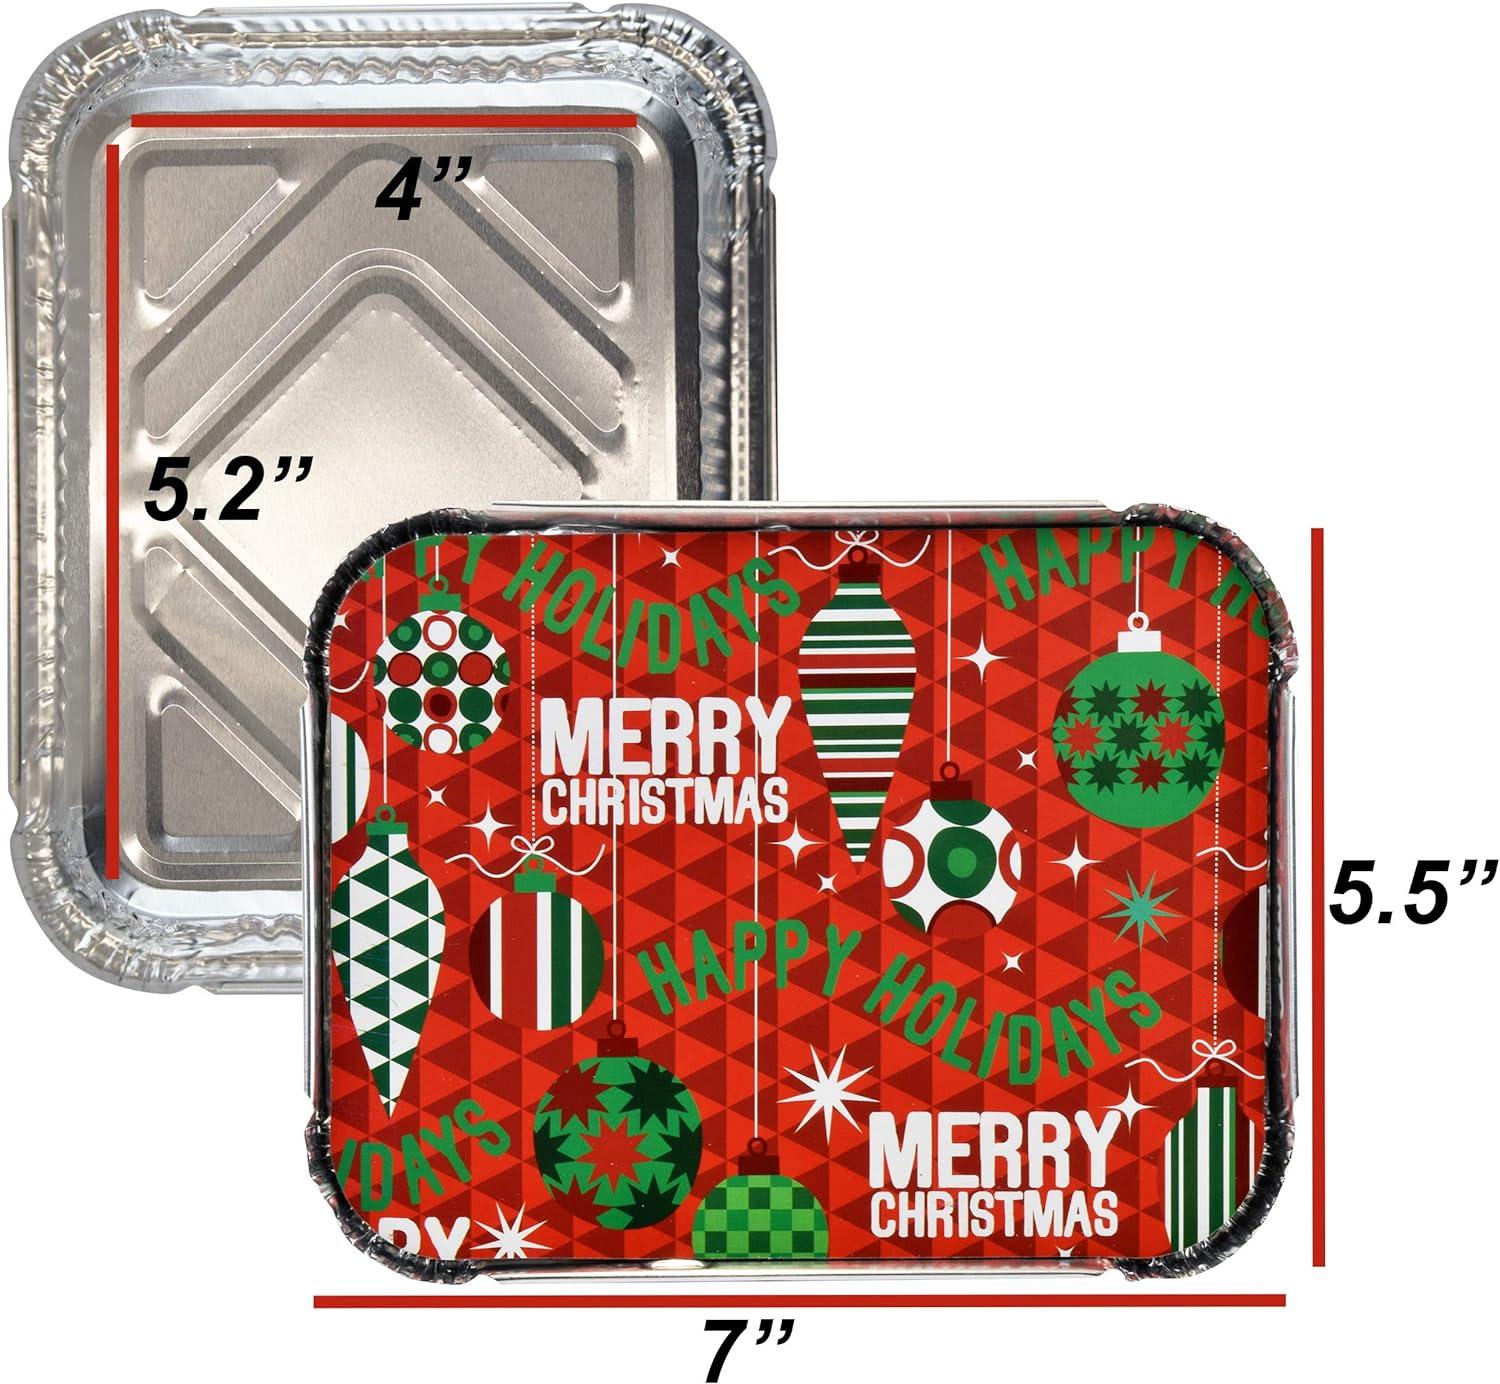 Christmas Aluminum Pans With Lids, Aluminum Food Containers, For